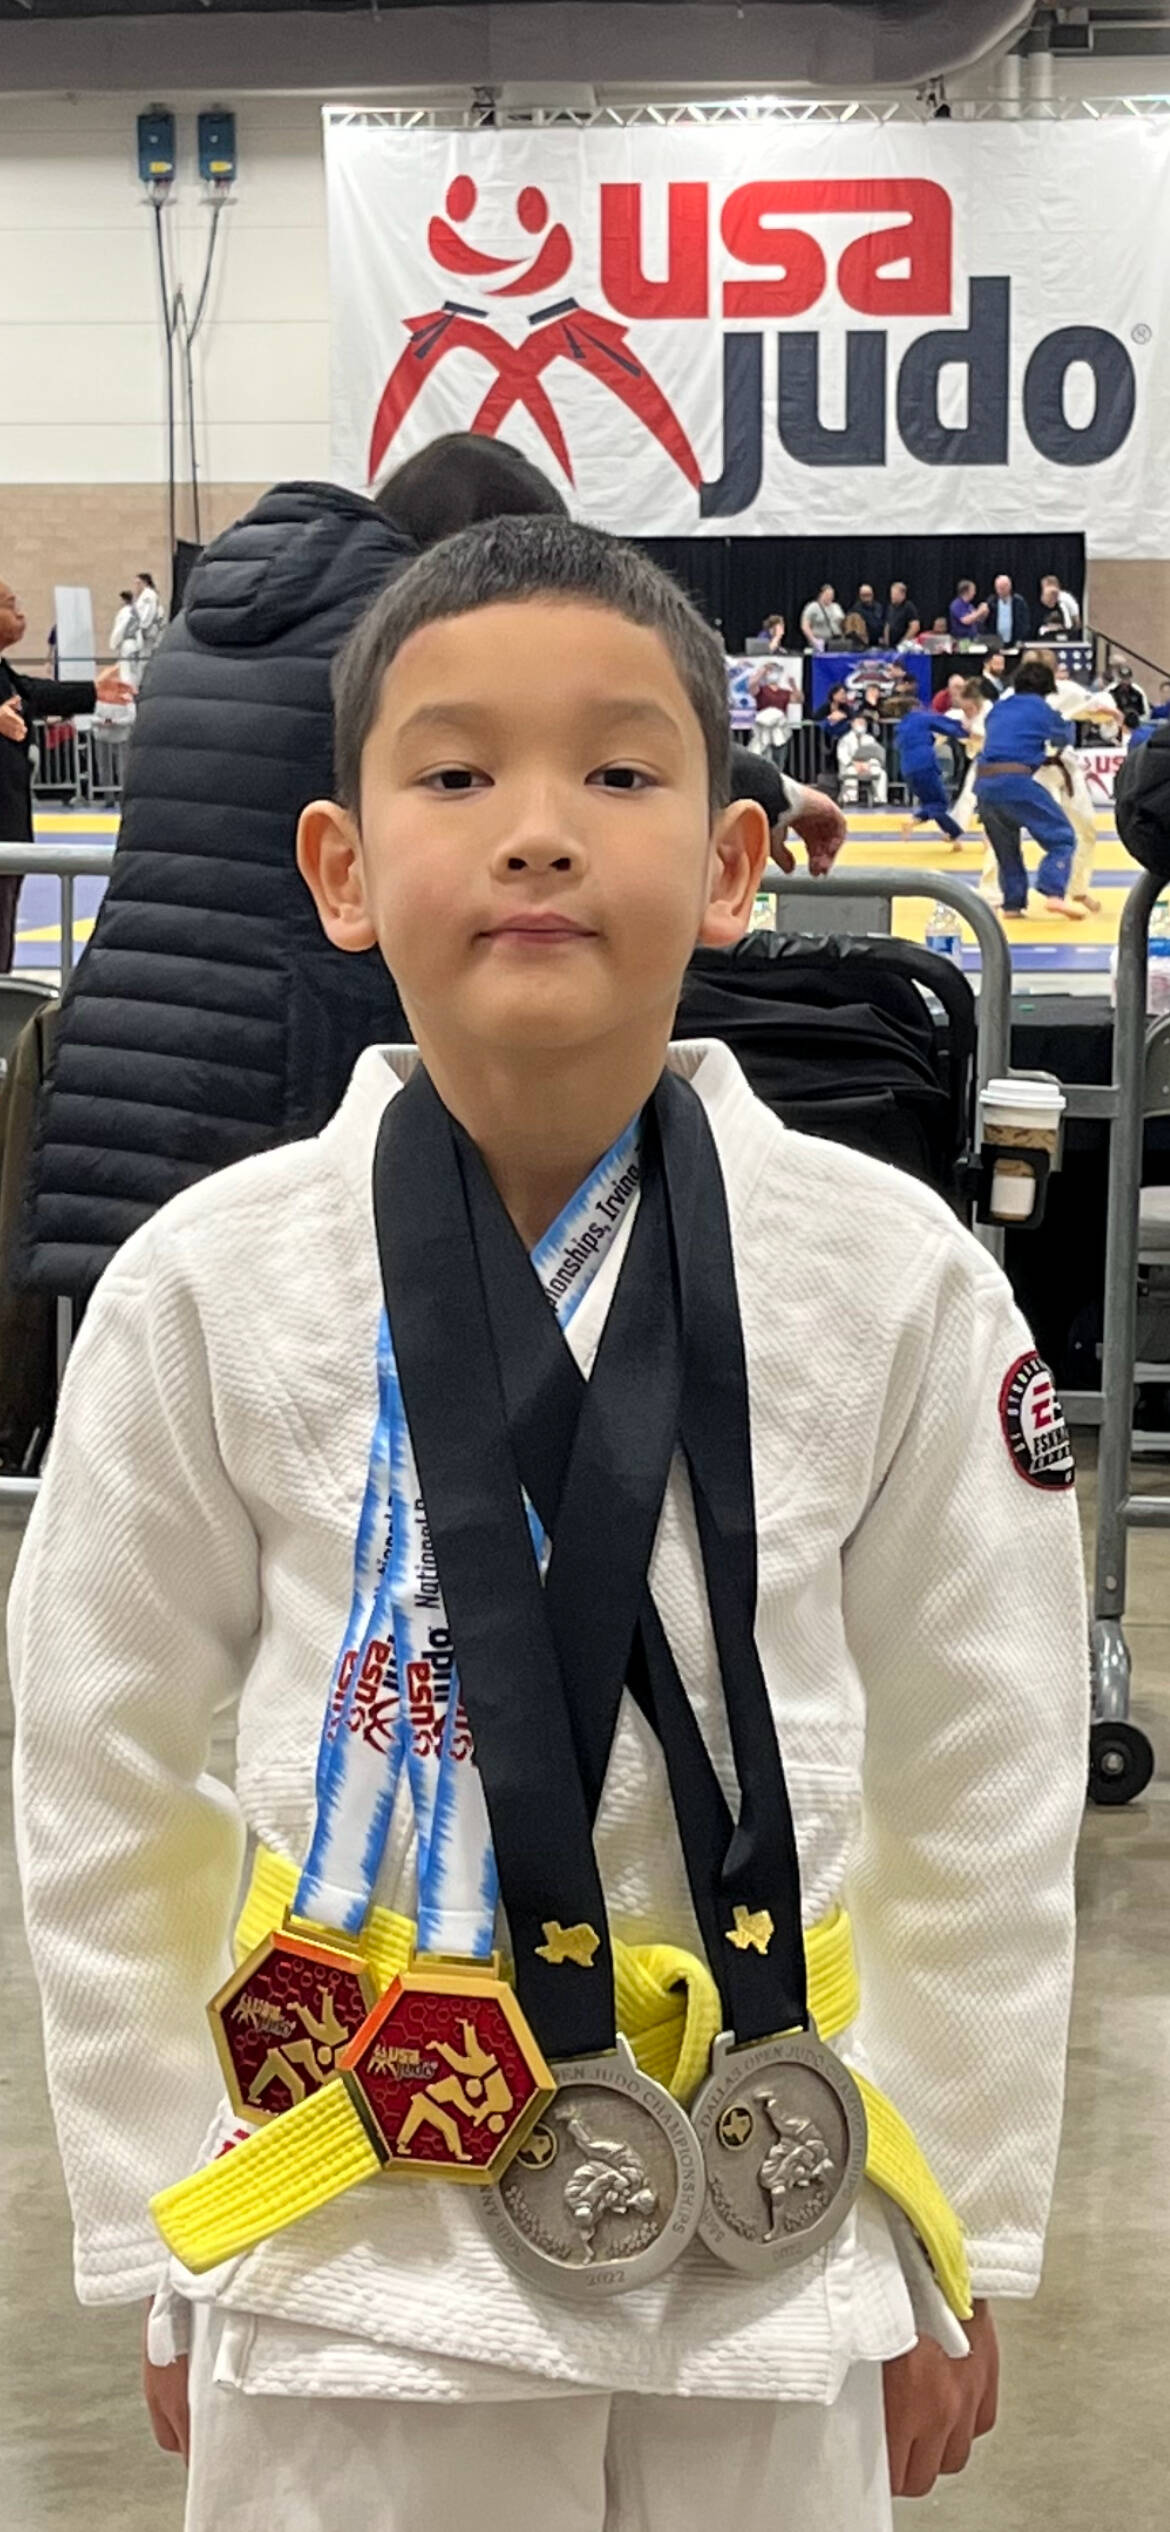 Northwood Elementary School student Mikhail Zulaev garnered four gold medals at a pair of youth judo tournaments in Irving, Texas, over one weekend last month. At the Dallas Open Judo Championships 2022, he won the Junior 2014-2015 26-29 kg division and the Junior Novice 2015-2017 28-31 kg division. At the USA Judo President’s Cup Judo Championships 2022, he won hard-fought duels in the Bantam 3 2015/Under 29kg category and Novice Bantam 2 2015/Under 27kg category. Courtesy photo